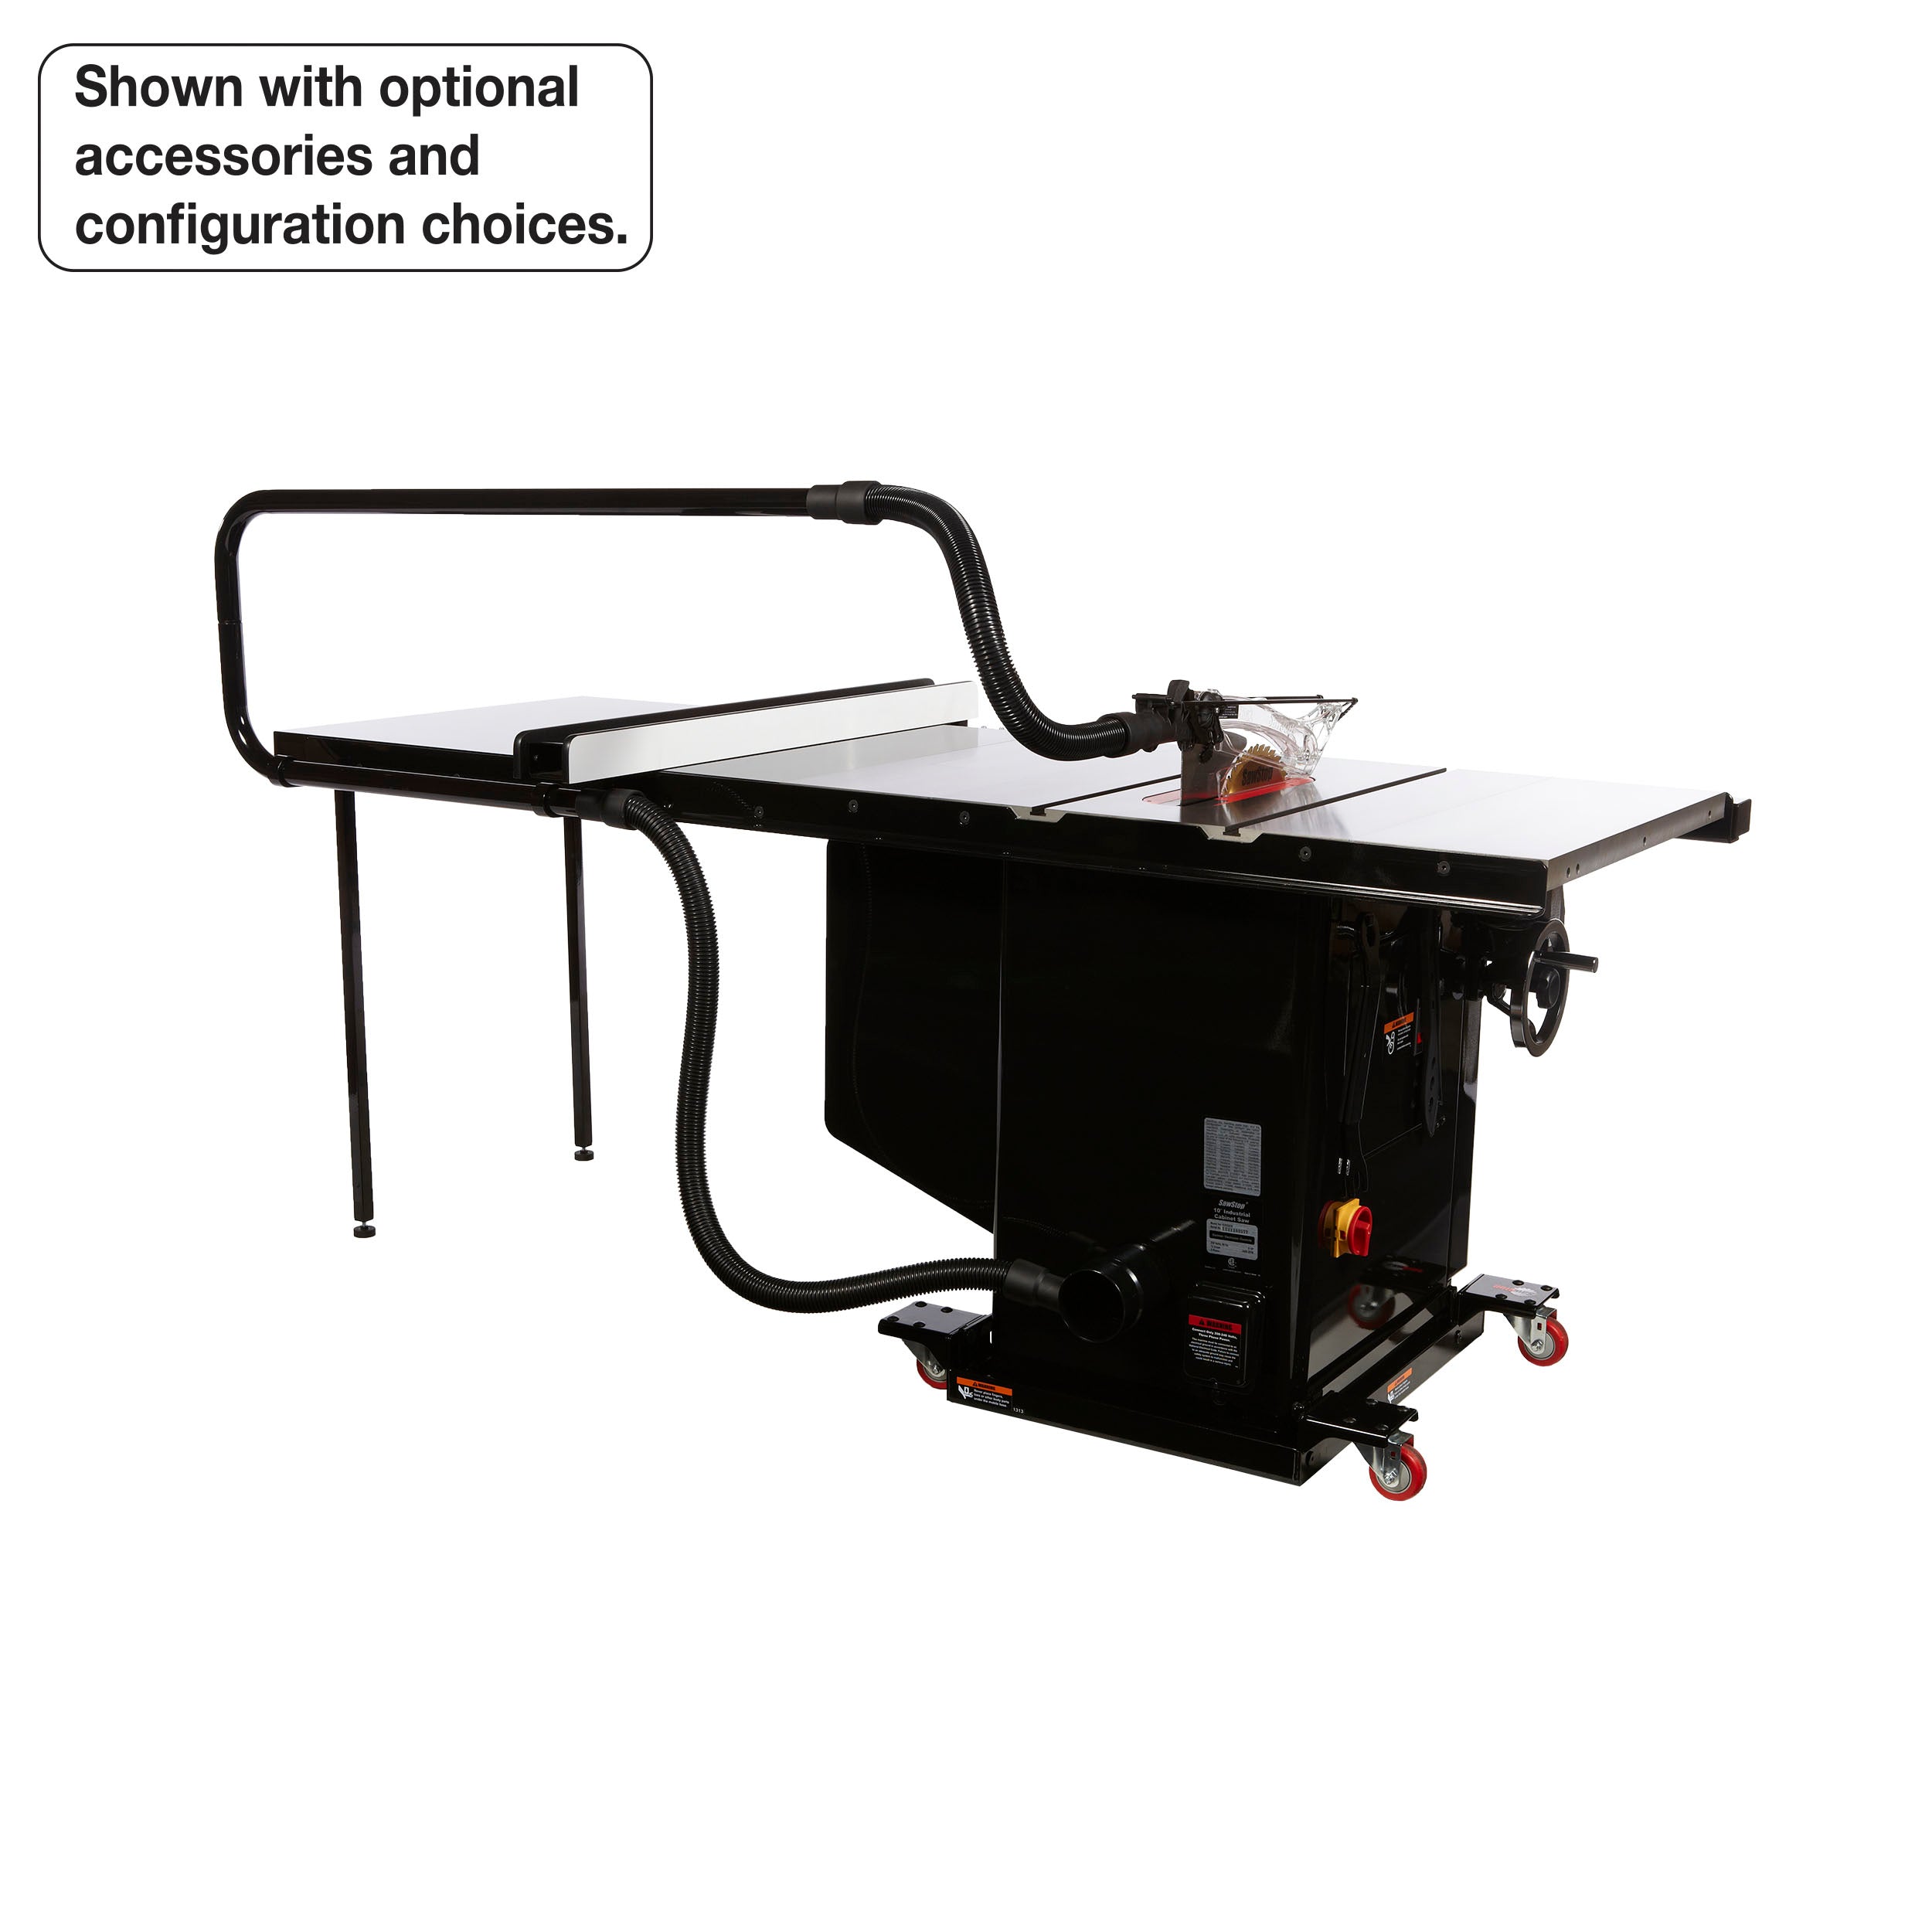 SawStop 7.5HP, 3ph, 480v Industrial Cabinet Saw w/ 36